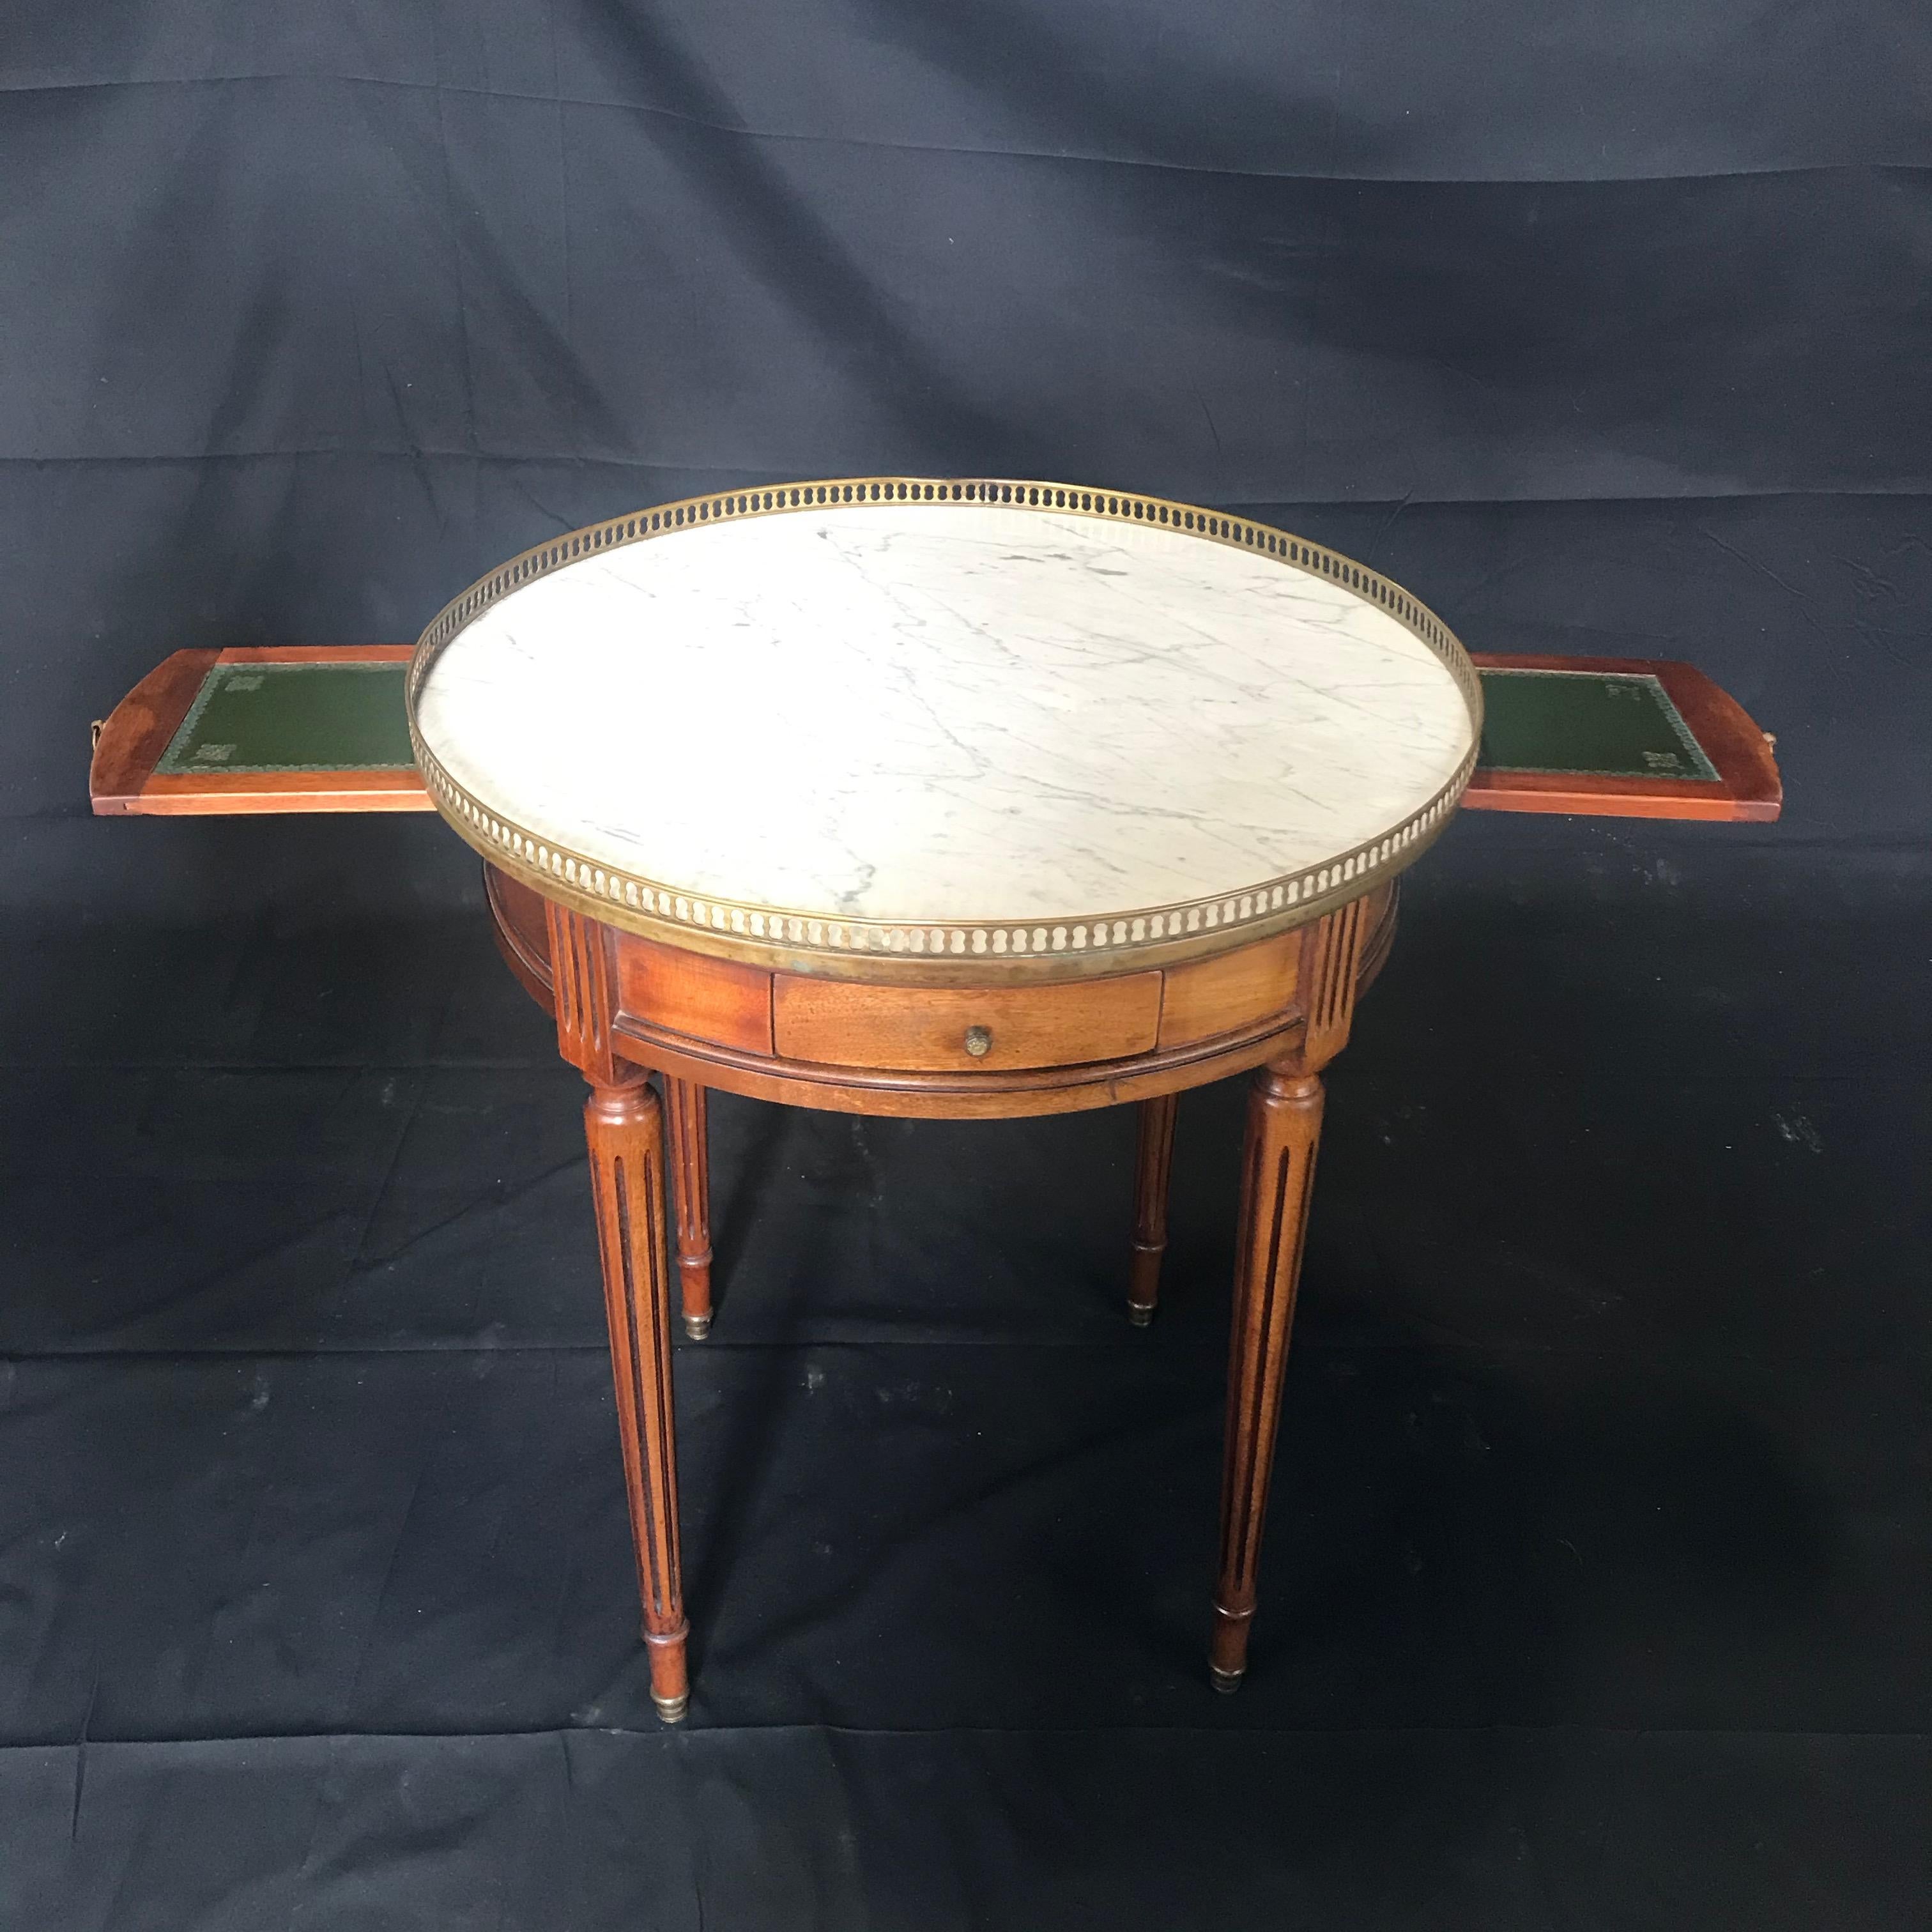 Distinctive French bouillotte walnut table featuring a round white marble top made in the Louis XVI style. The round case has two drawers and two pull outs on each side. The marble top has a brass gallery edge and is supported by elegant, tapered